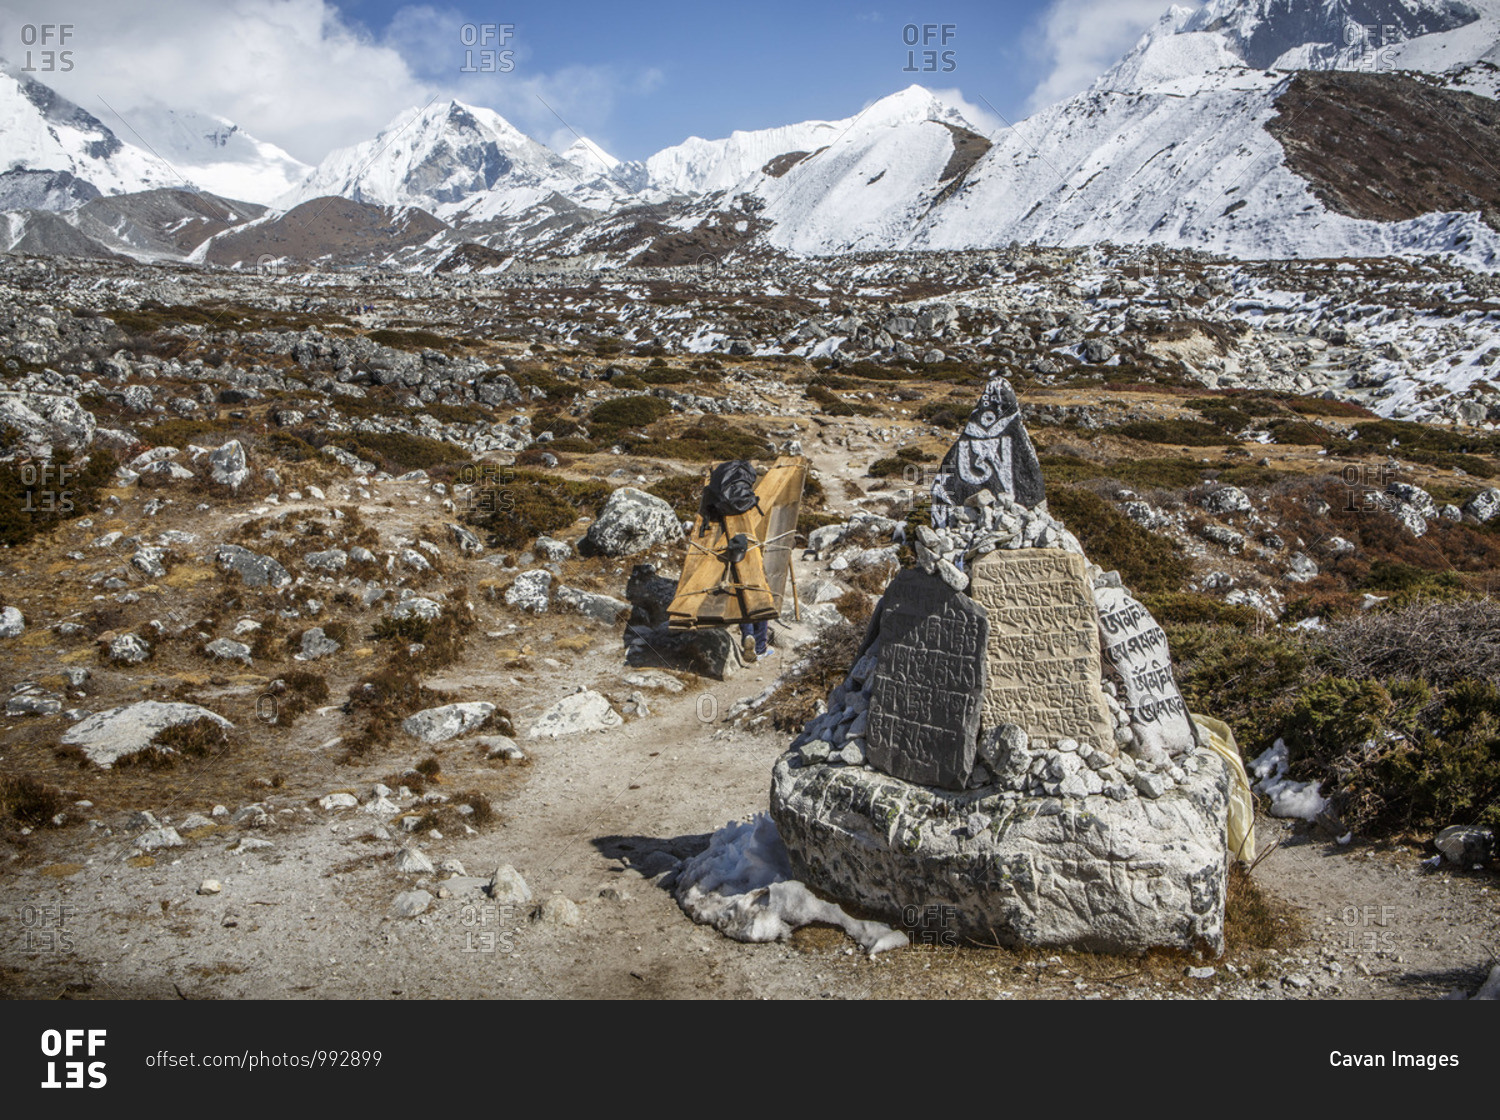 A porter carries goods past prayer stones in Nepal's Khumbu Valley.